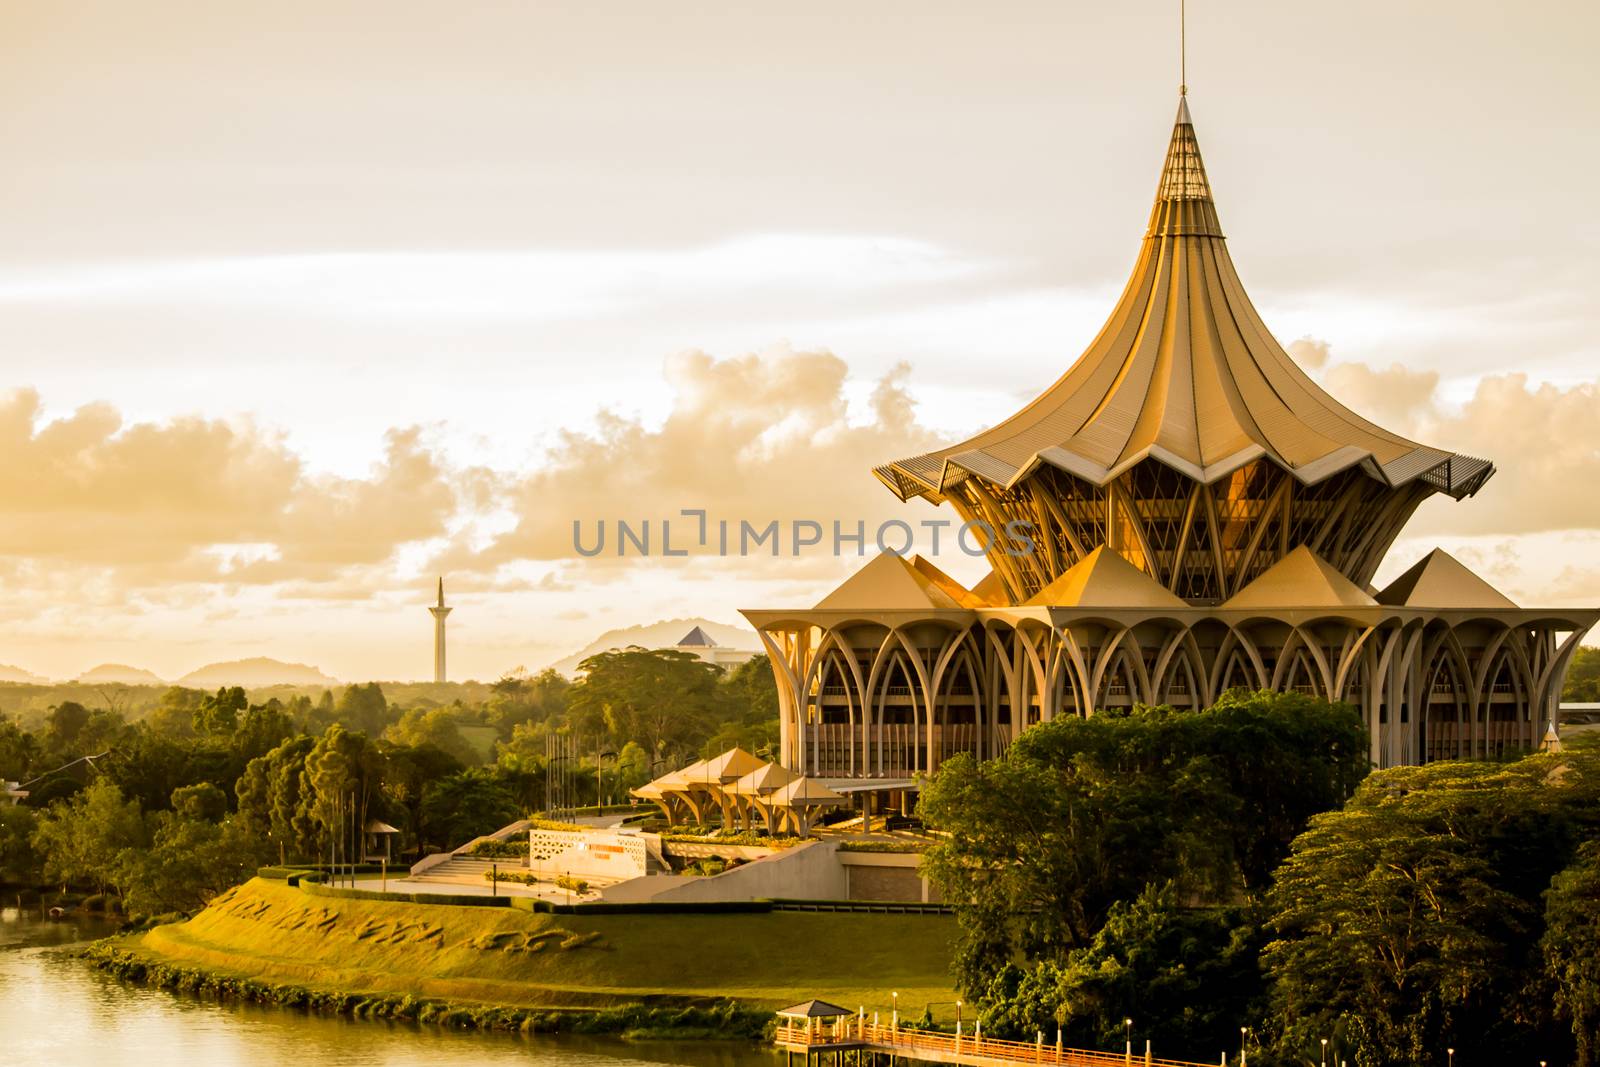 View of the Esplanade on the riverside in Kuching, Malaysia - Borneo during sunset. by kb79